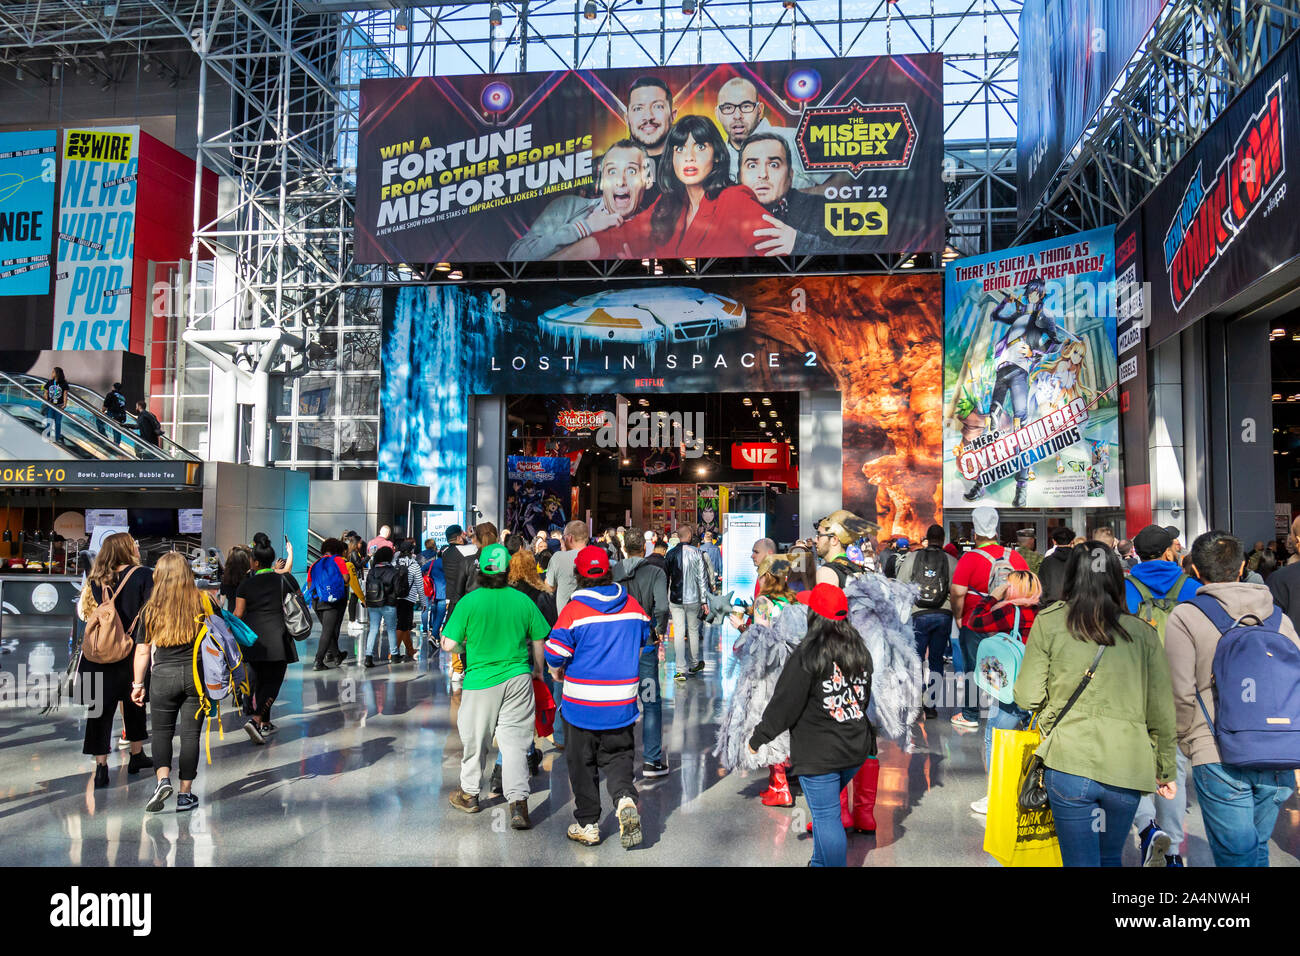 Visitors and fans attend the New York Comic Con Comic Book, Movie and Convention. Stock Photo